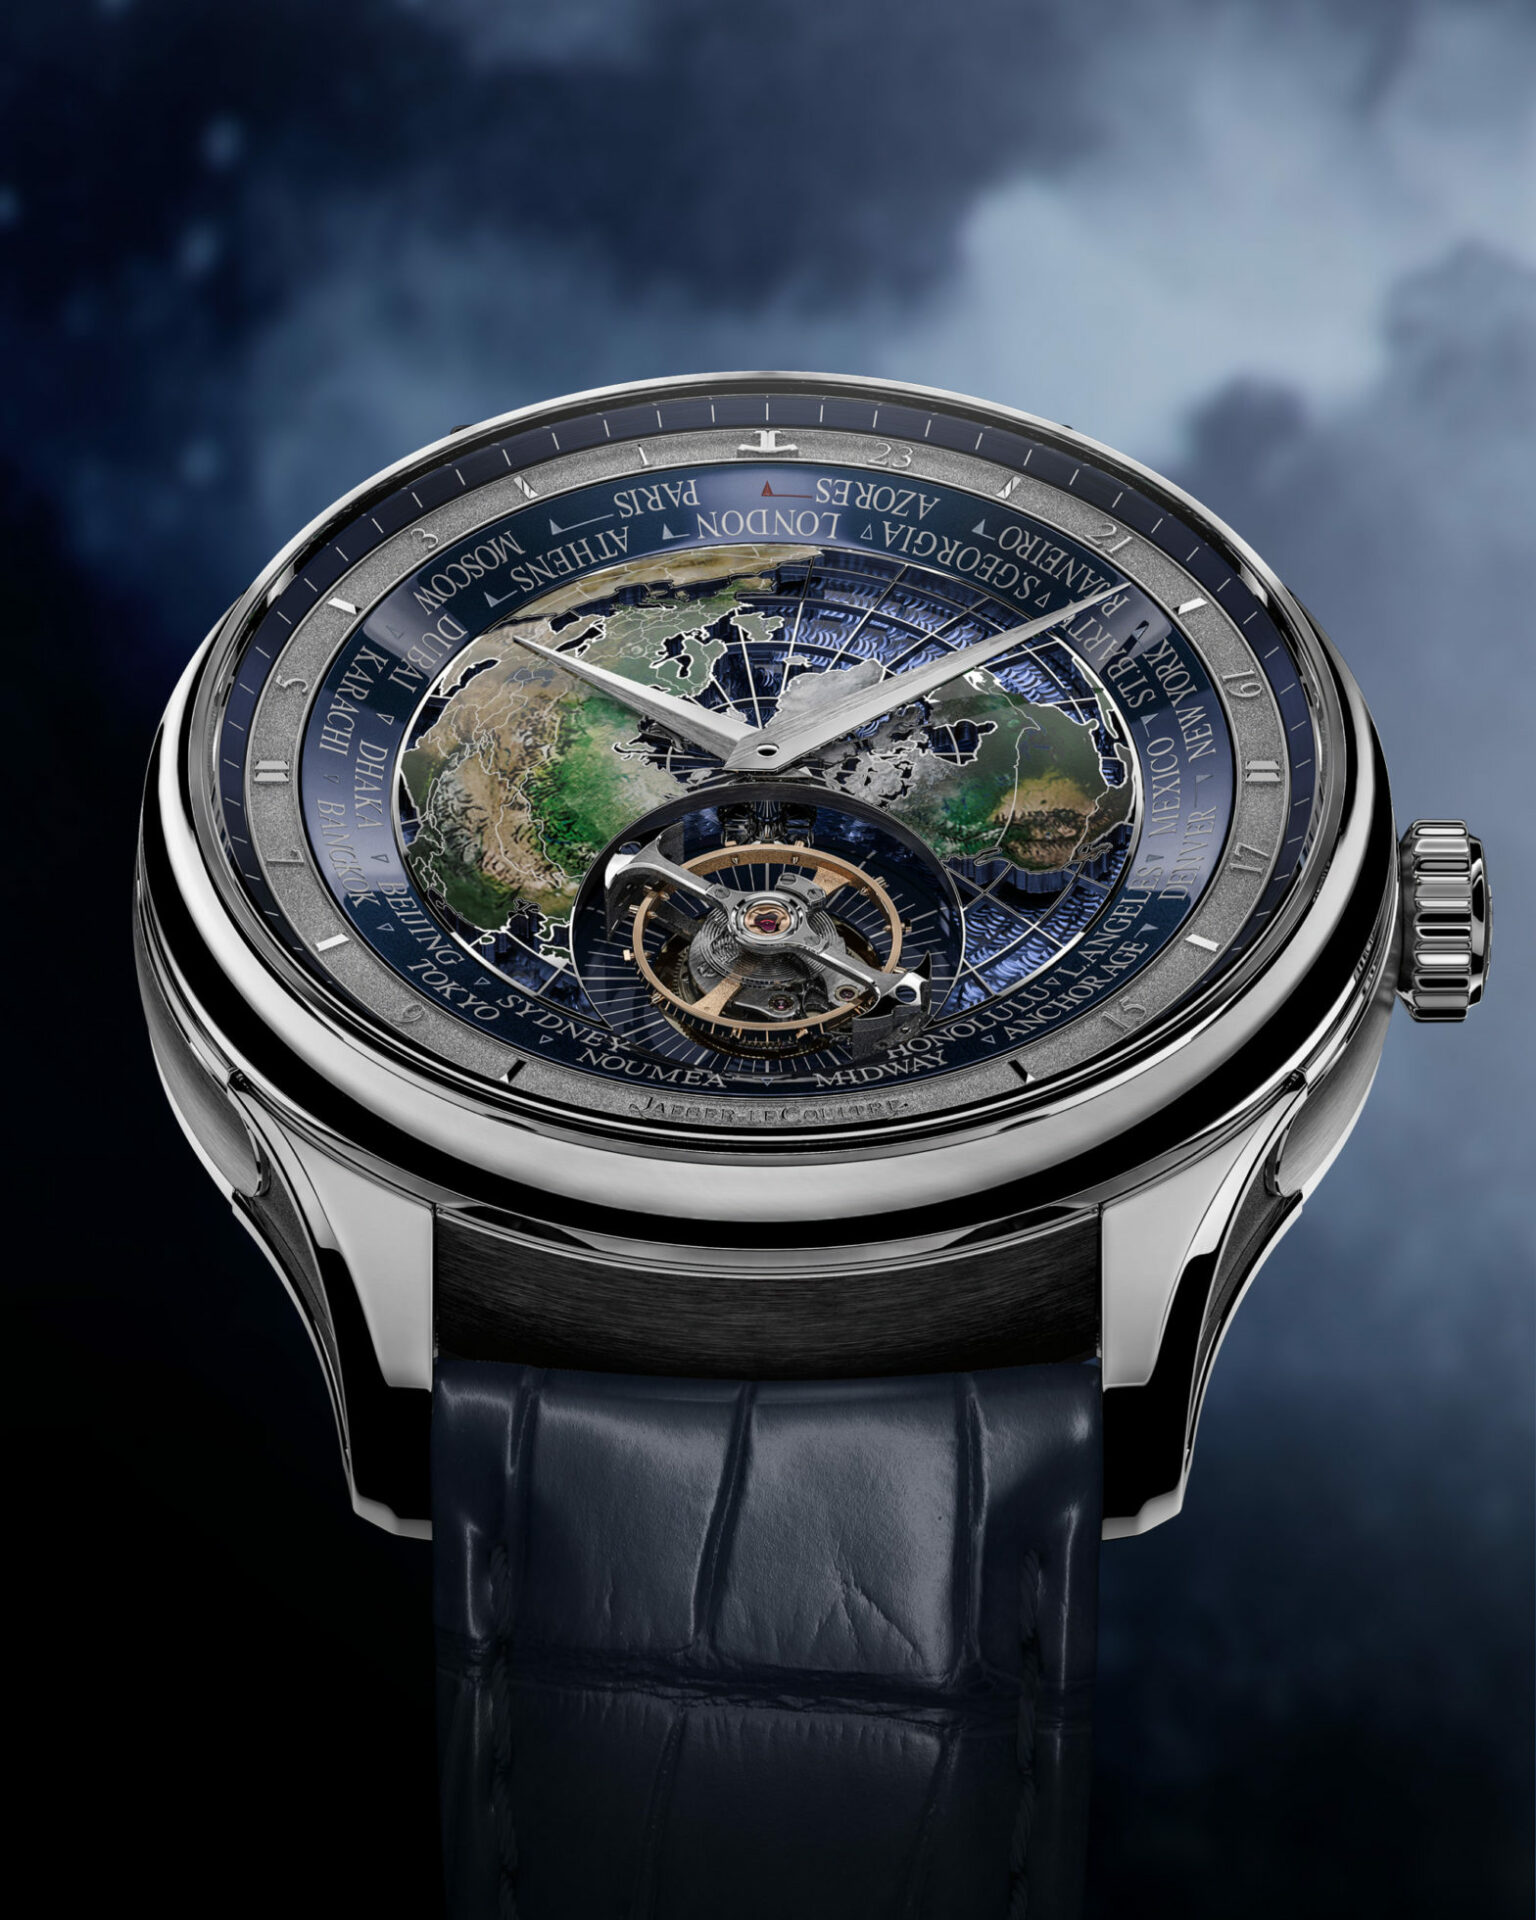 Jaeger-LeCoultre go star-gazing with the Stellar Odyssey collection